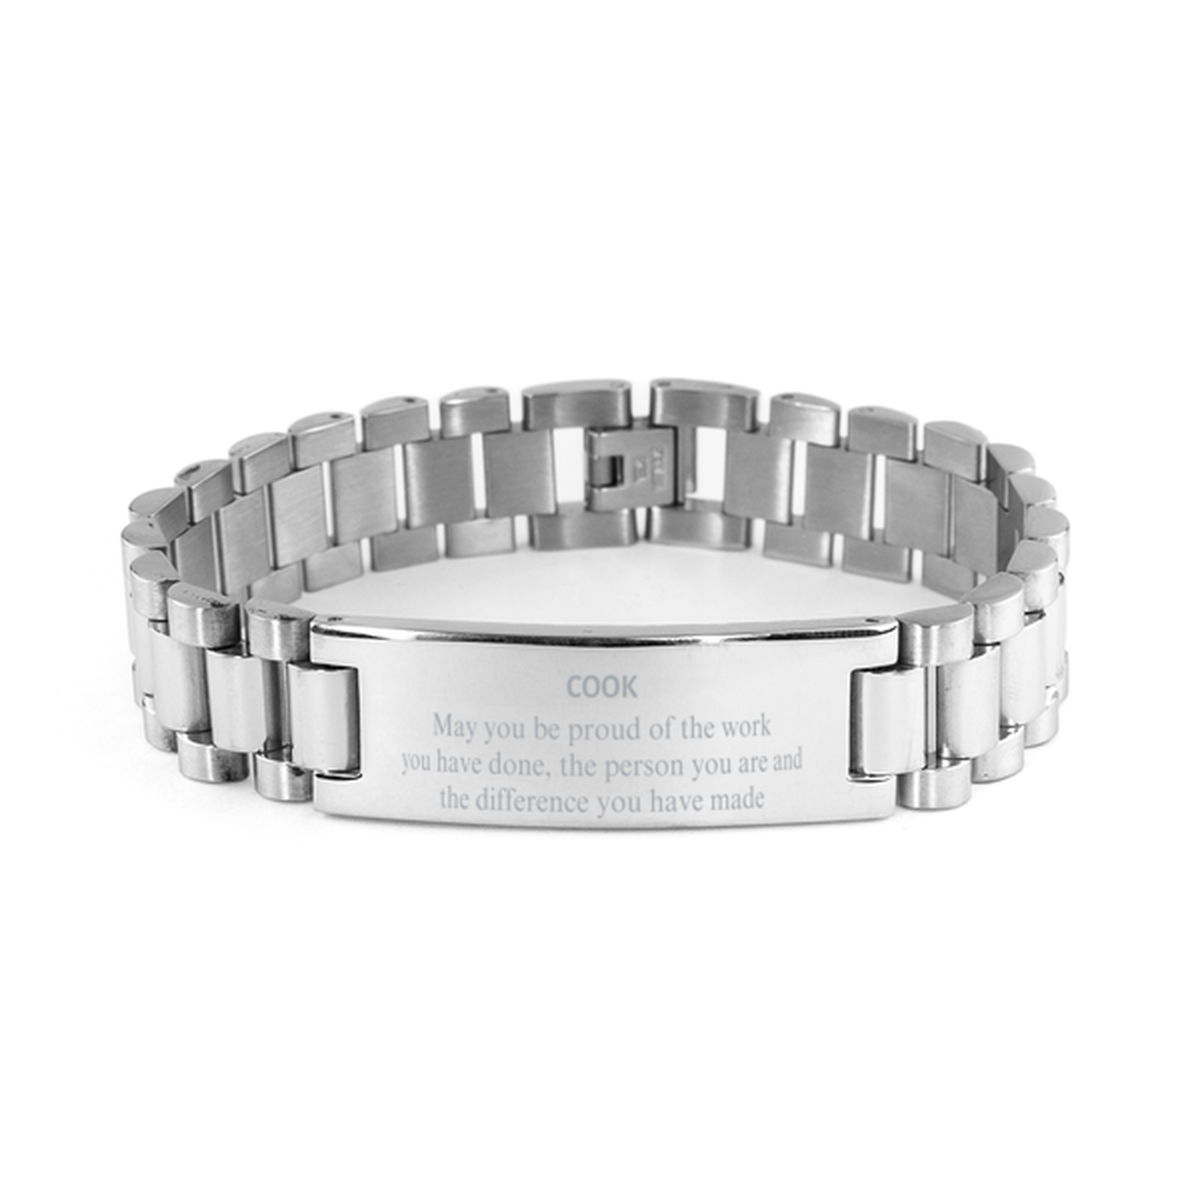 Cook May you be proud of the work you have done, Retirement Cook Ladder Stainless Steel Bracelet for Colleague Appreciation Gifts Amazing for Cook